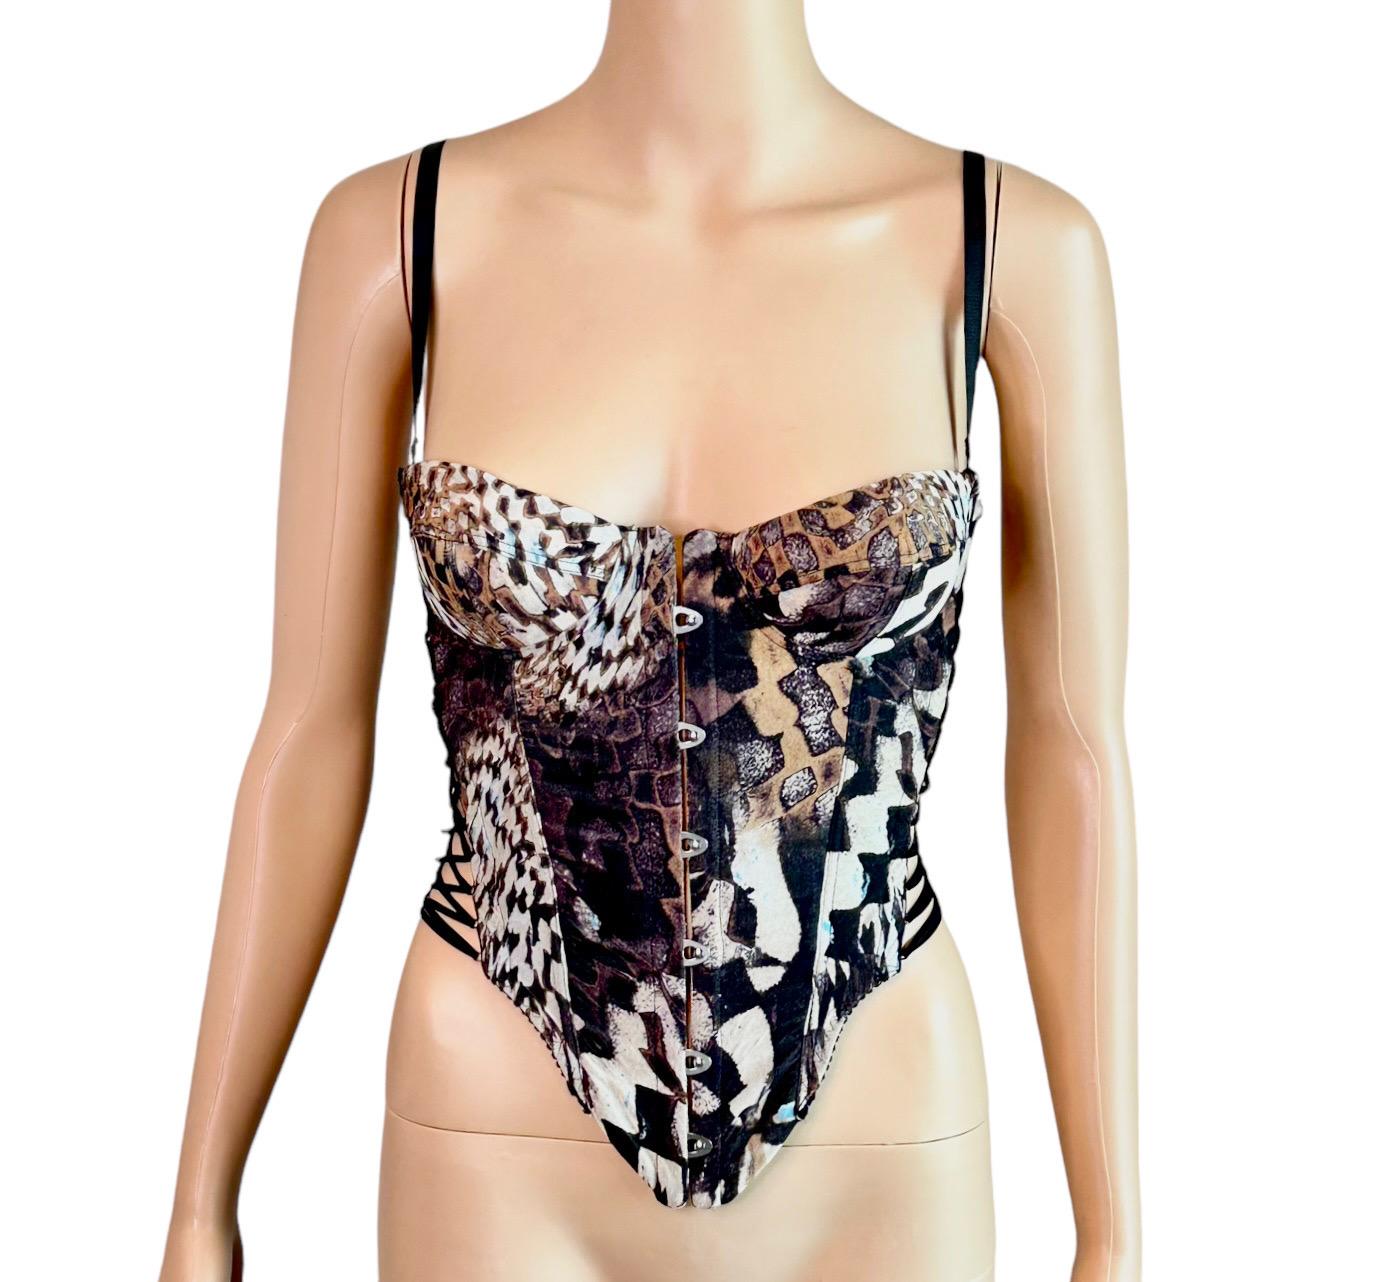 Roberto Cavalli Bustier Corset Lace Up Abstract Print Crop Top Size IT 42

FOLLOW US ON INSTAGRAM @OPULENTADDICT
